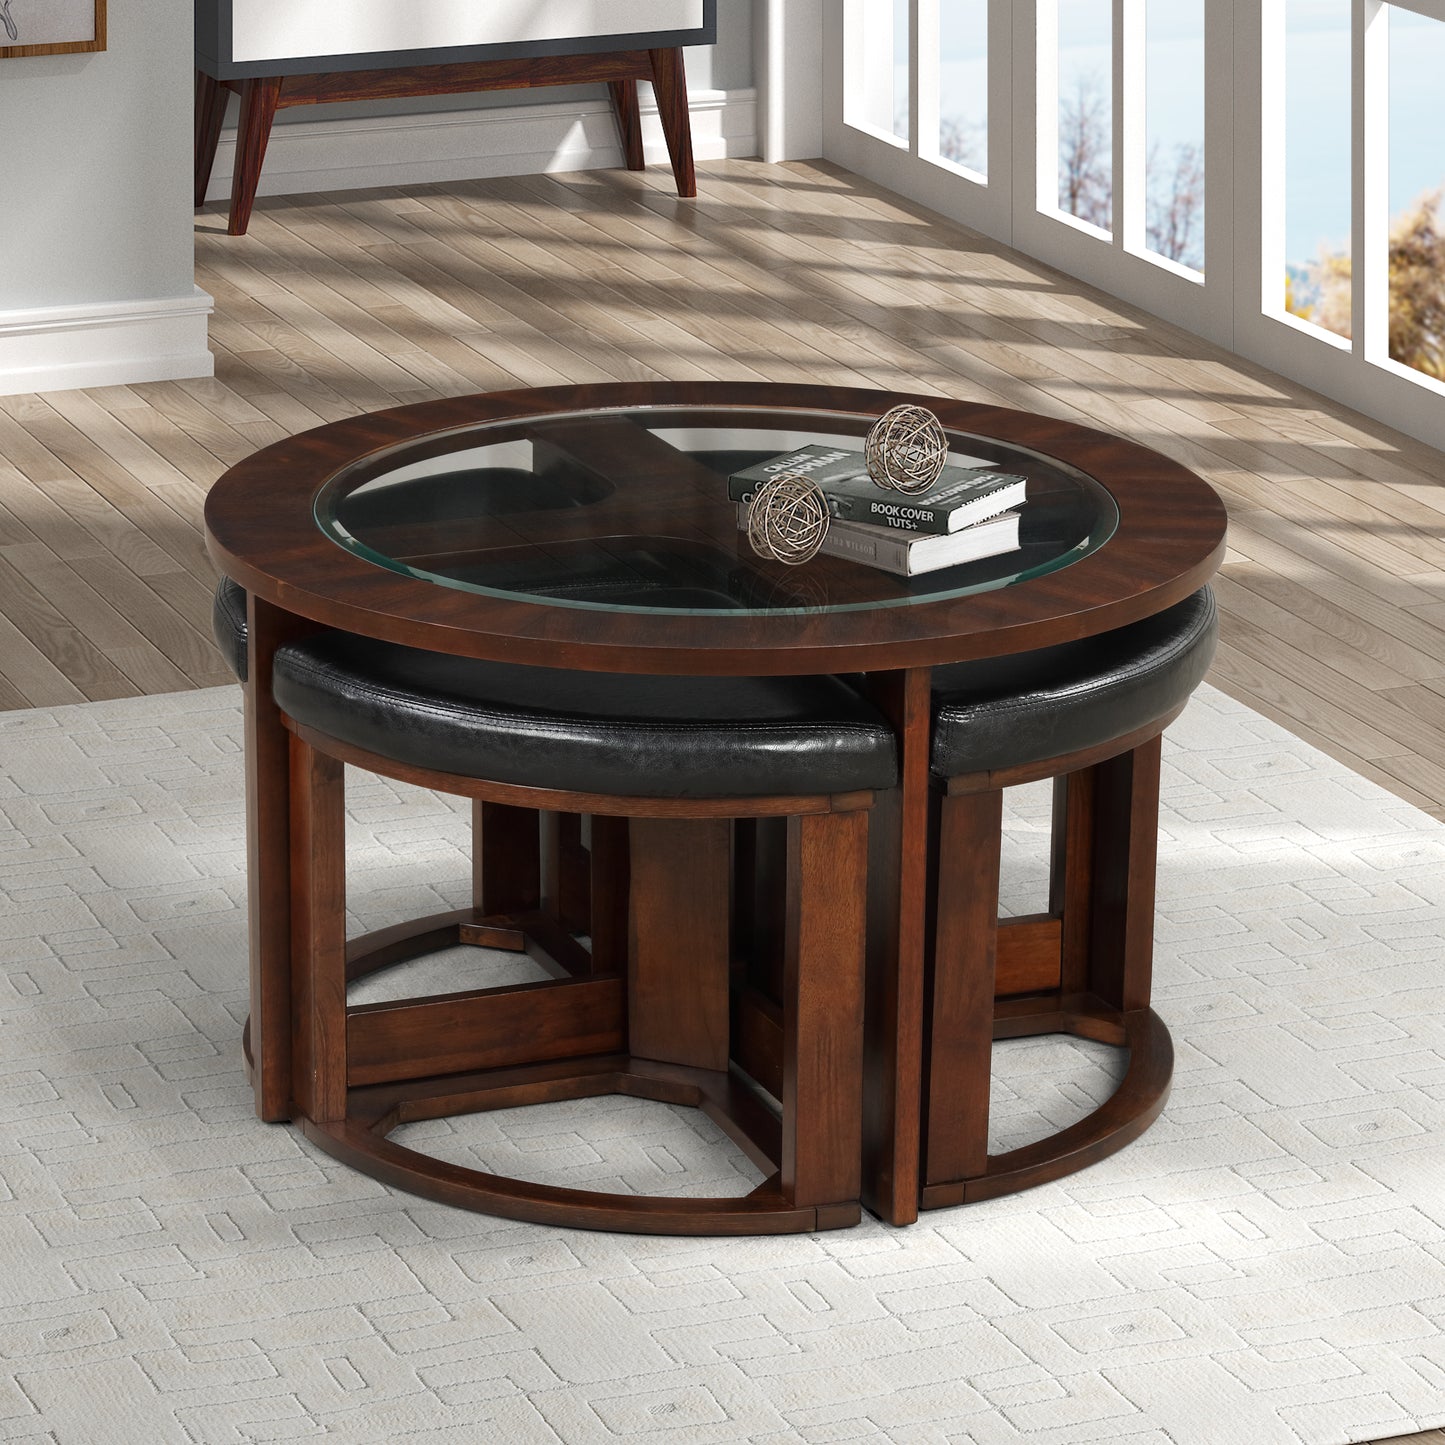 Solid Wood Glass Top Coffee Table w/ Stools